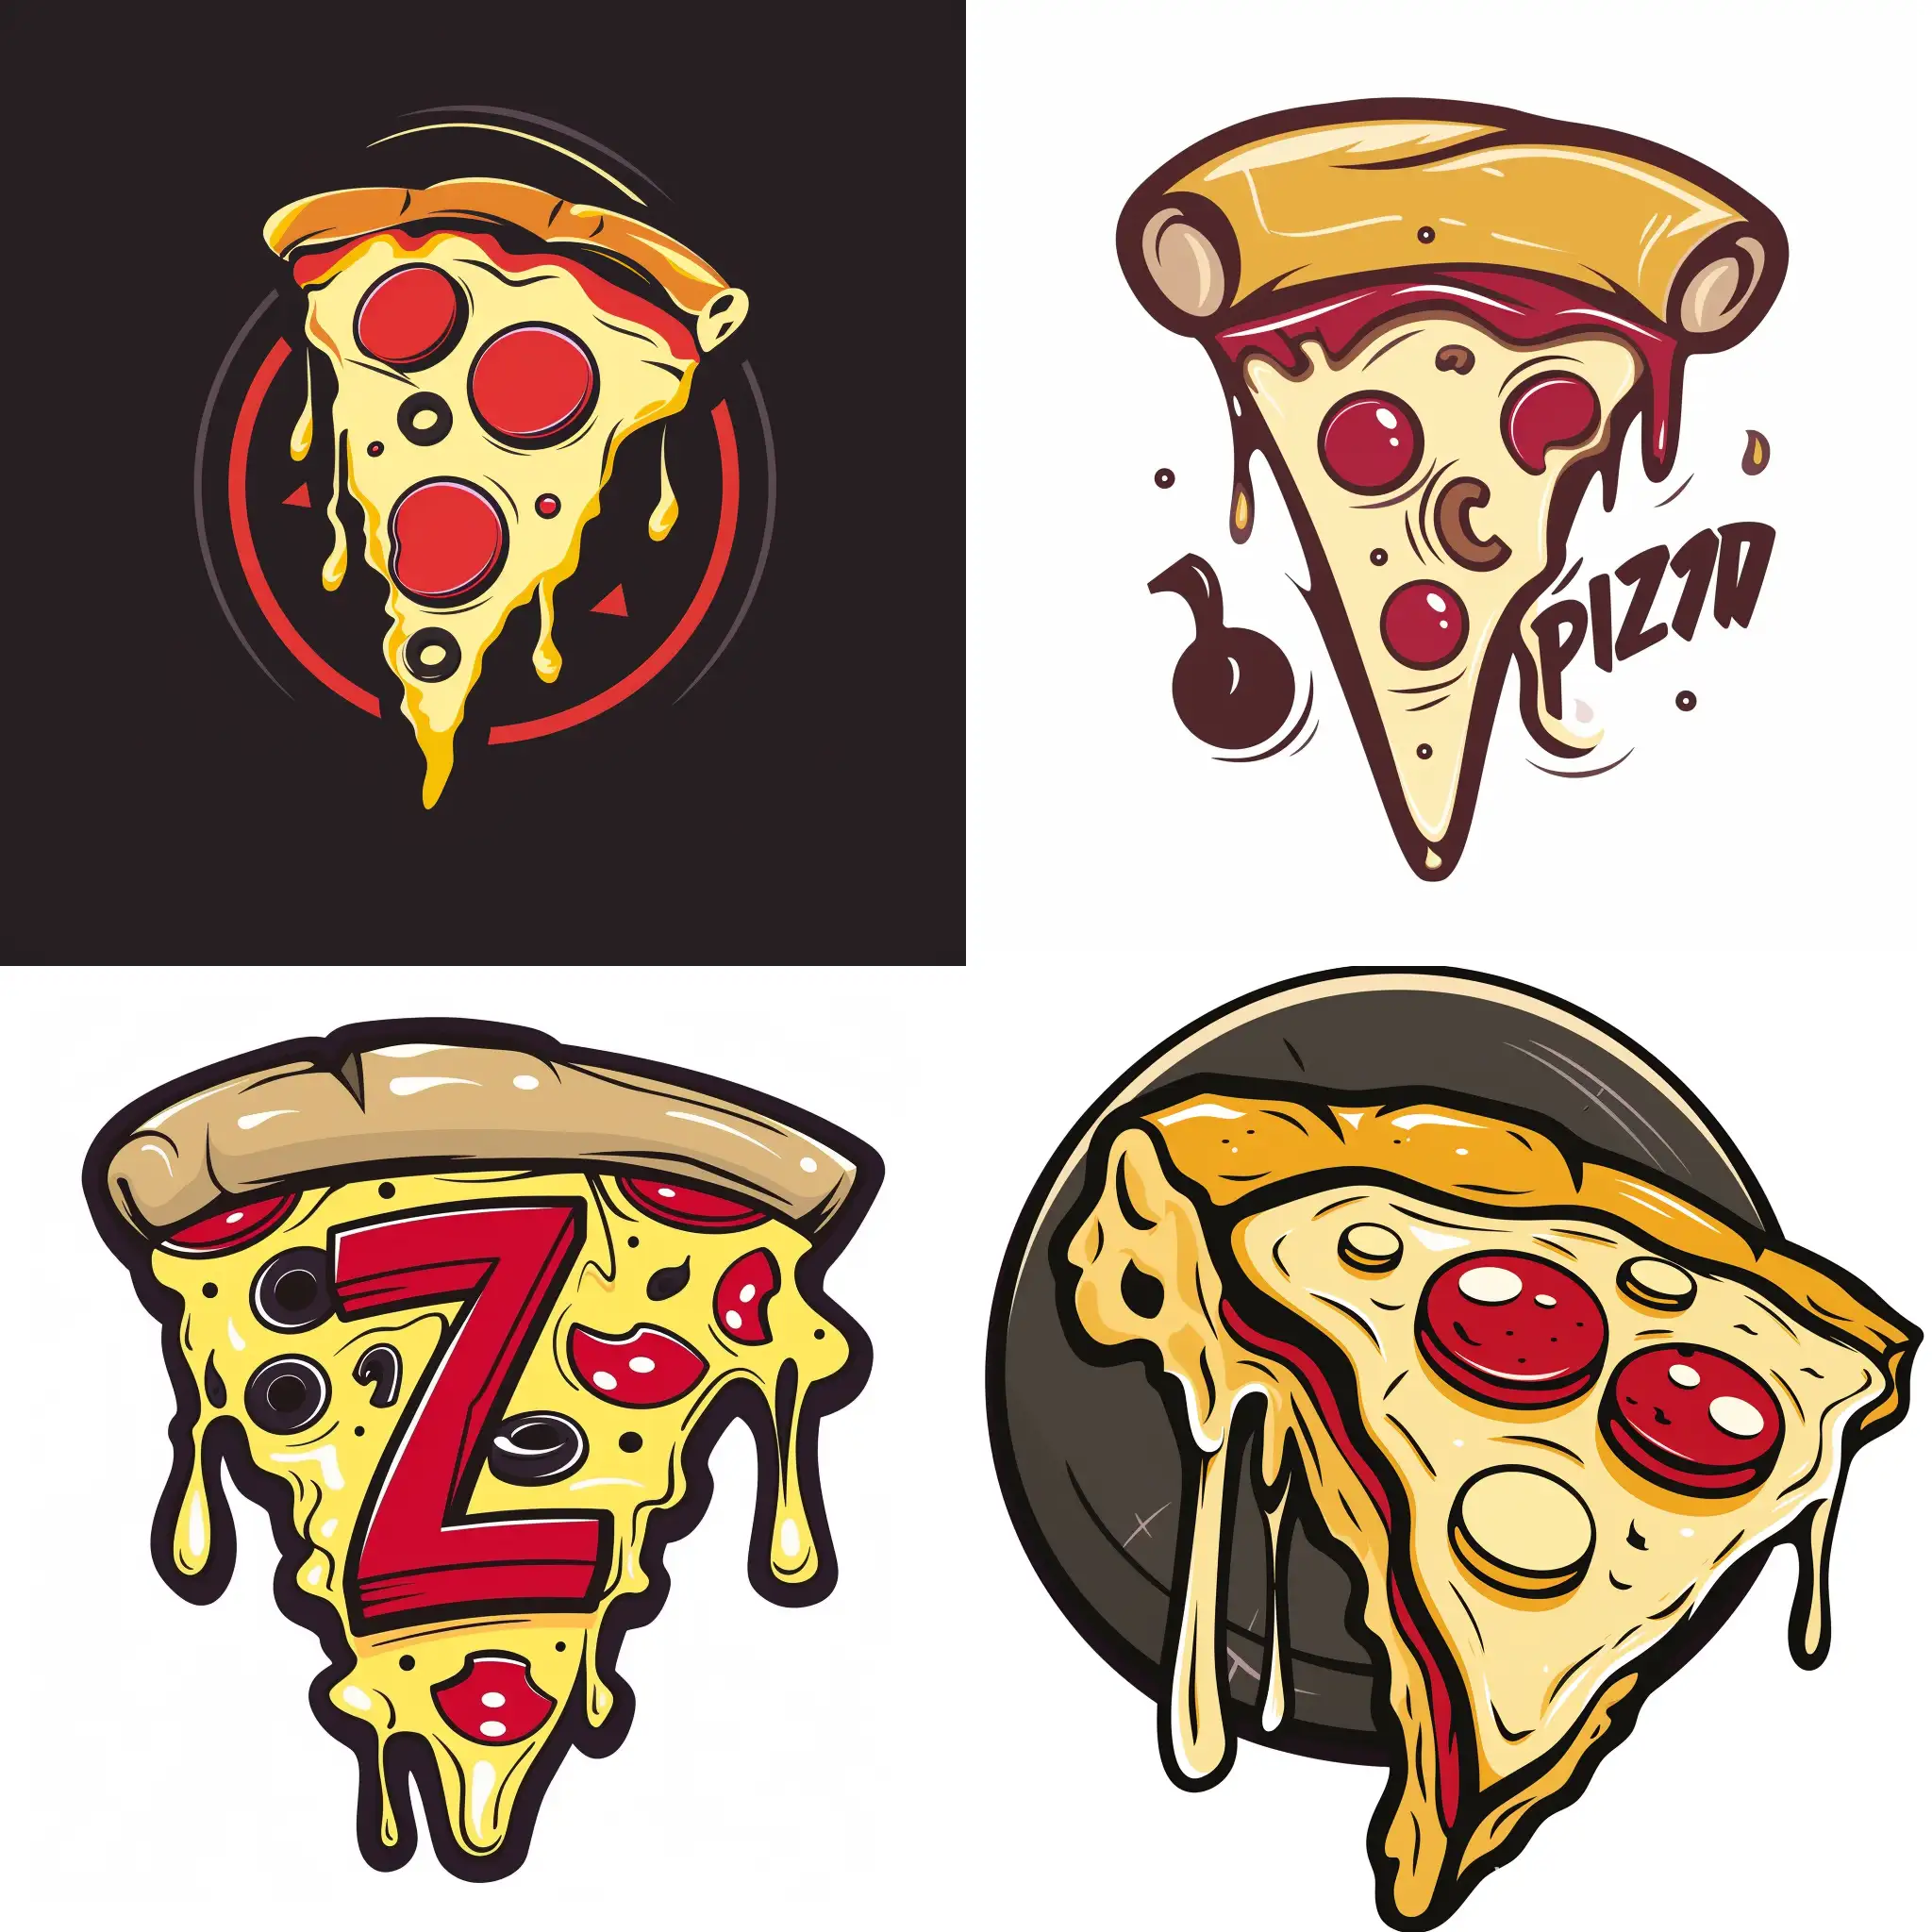 Cheerful-Pizza-Delivery-Logo-with-Vibrant-Colors-and-Modern-Design